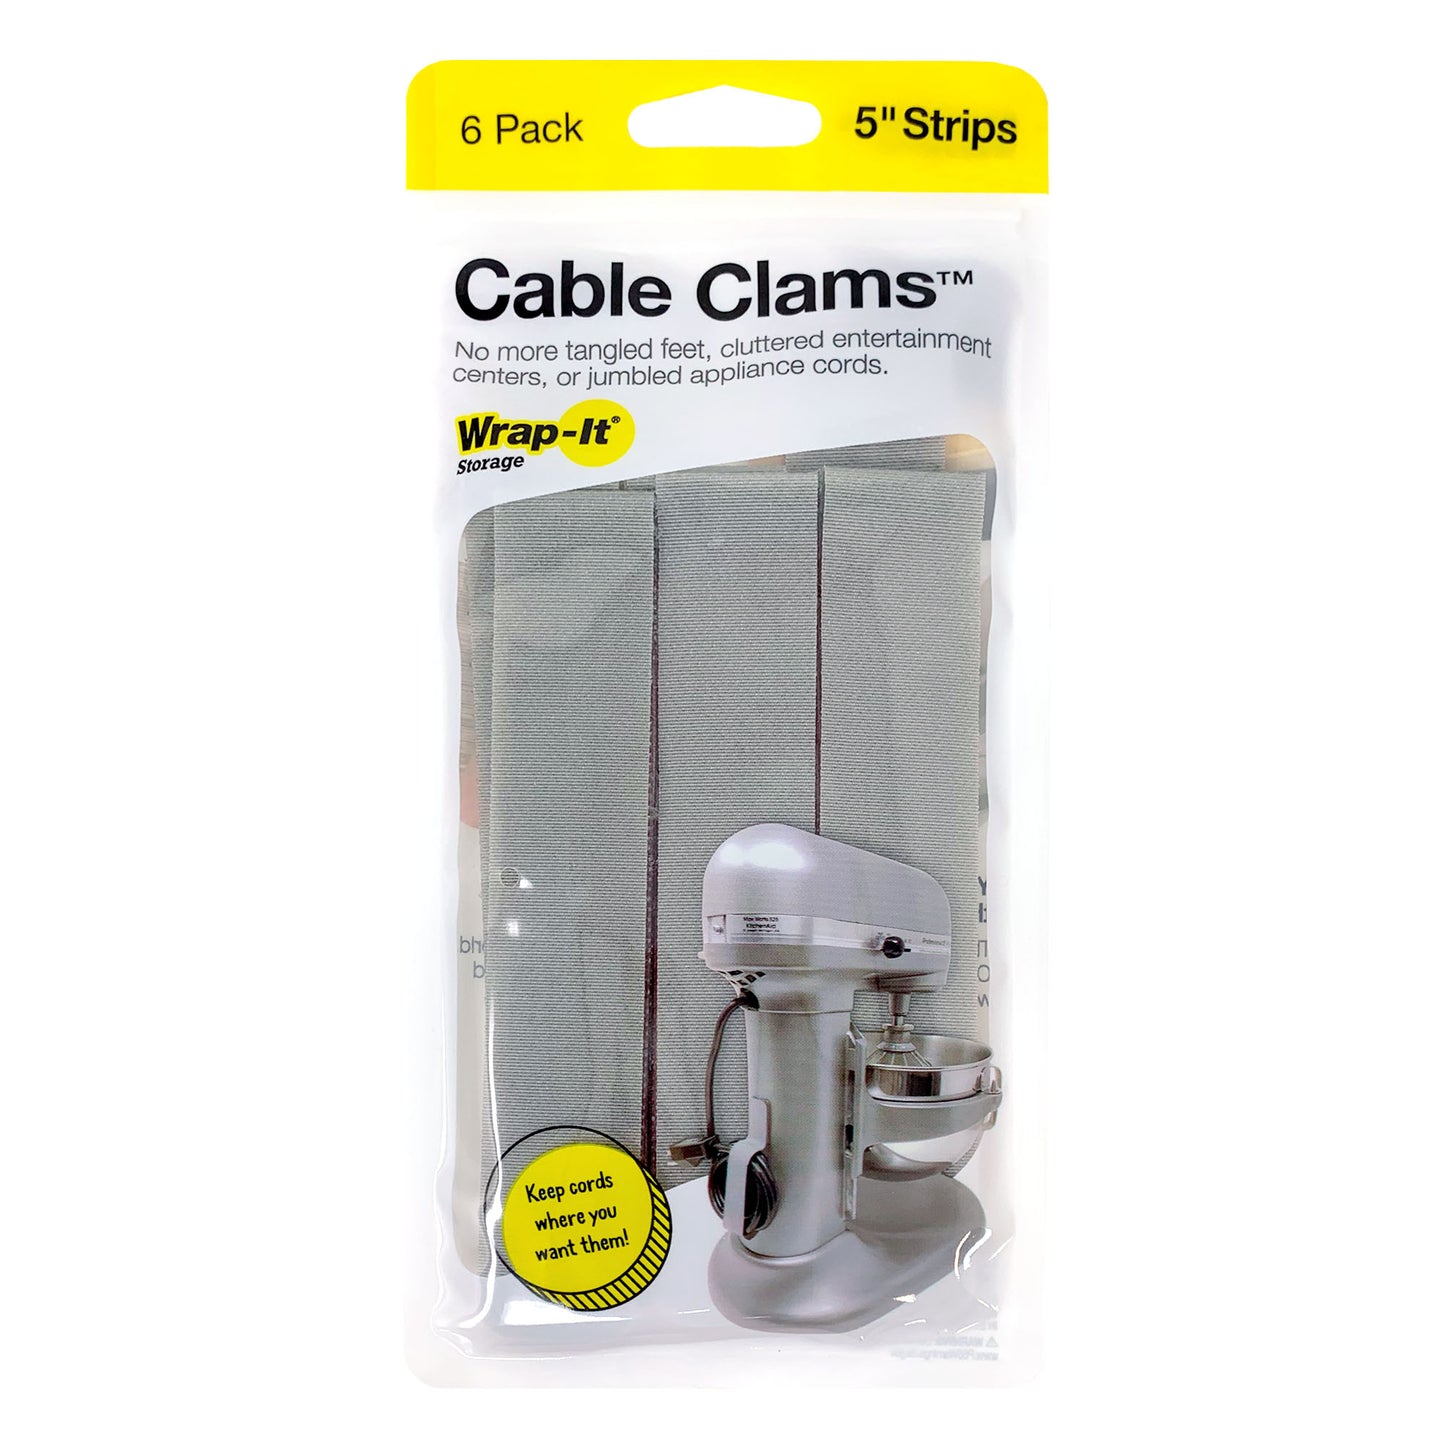 Cable Clams 5-in. Strip (6-Pack) - Wrap-It Storage